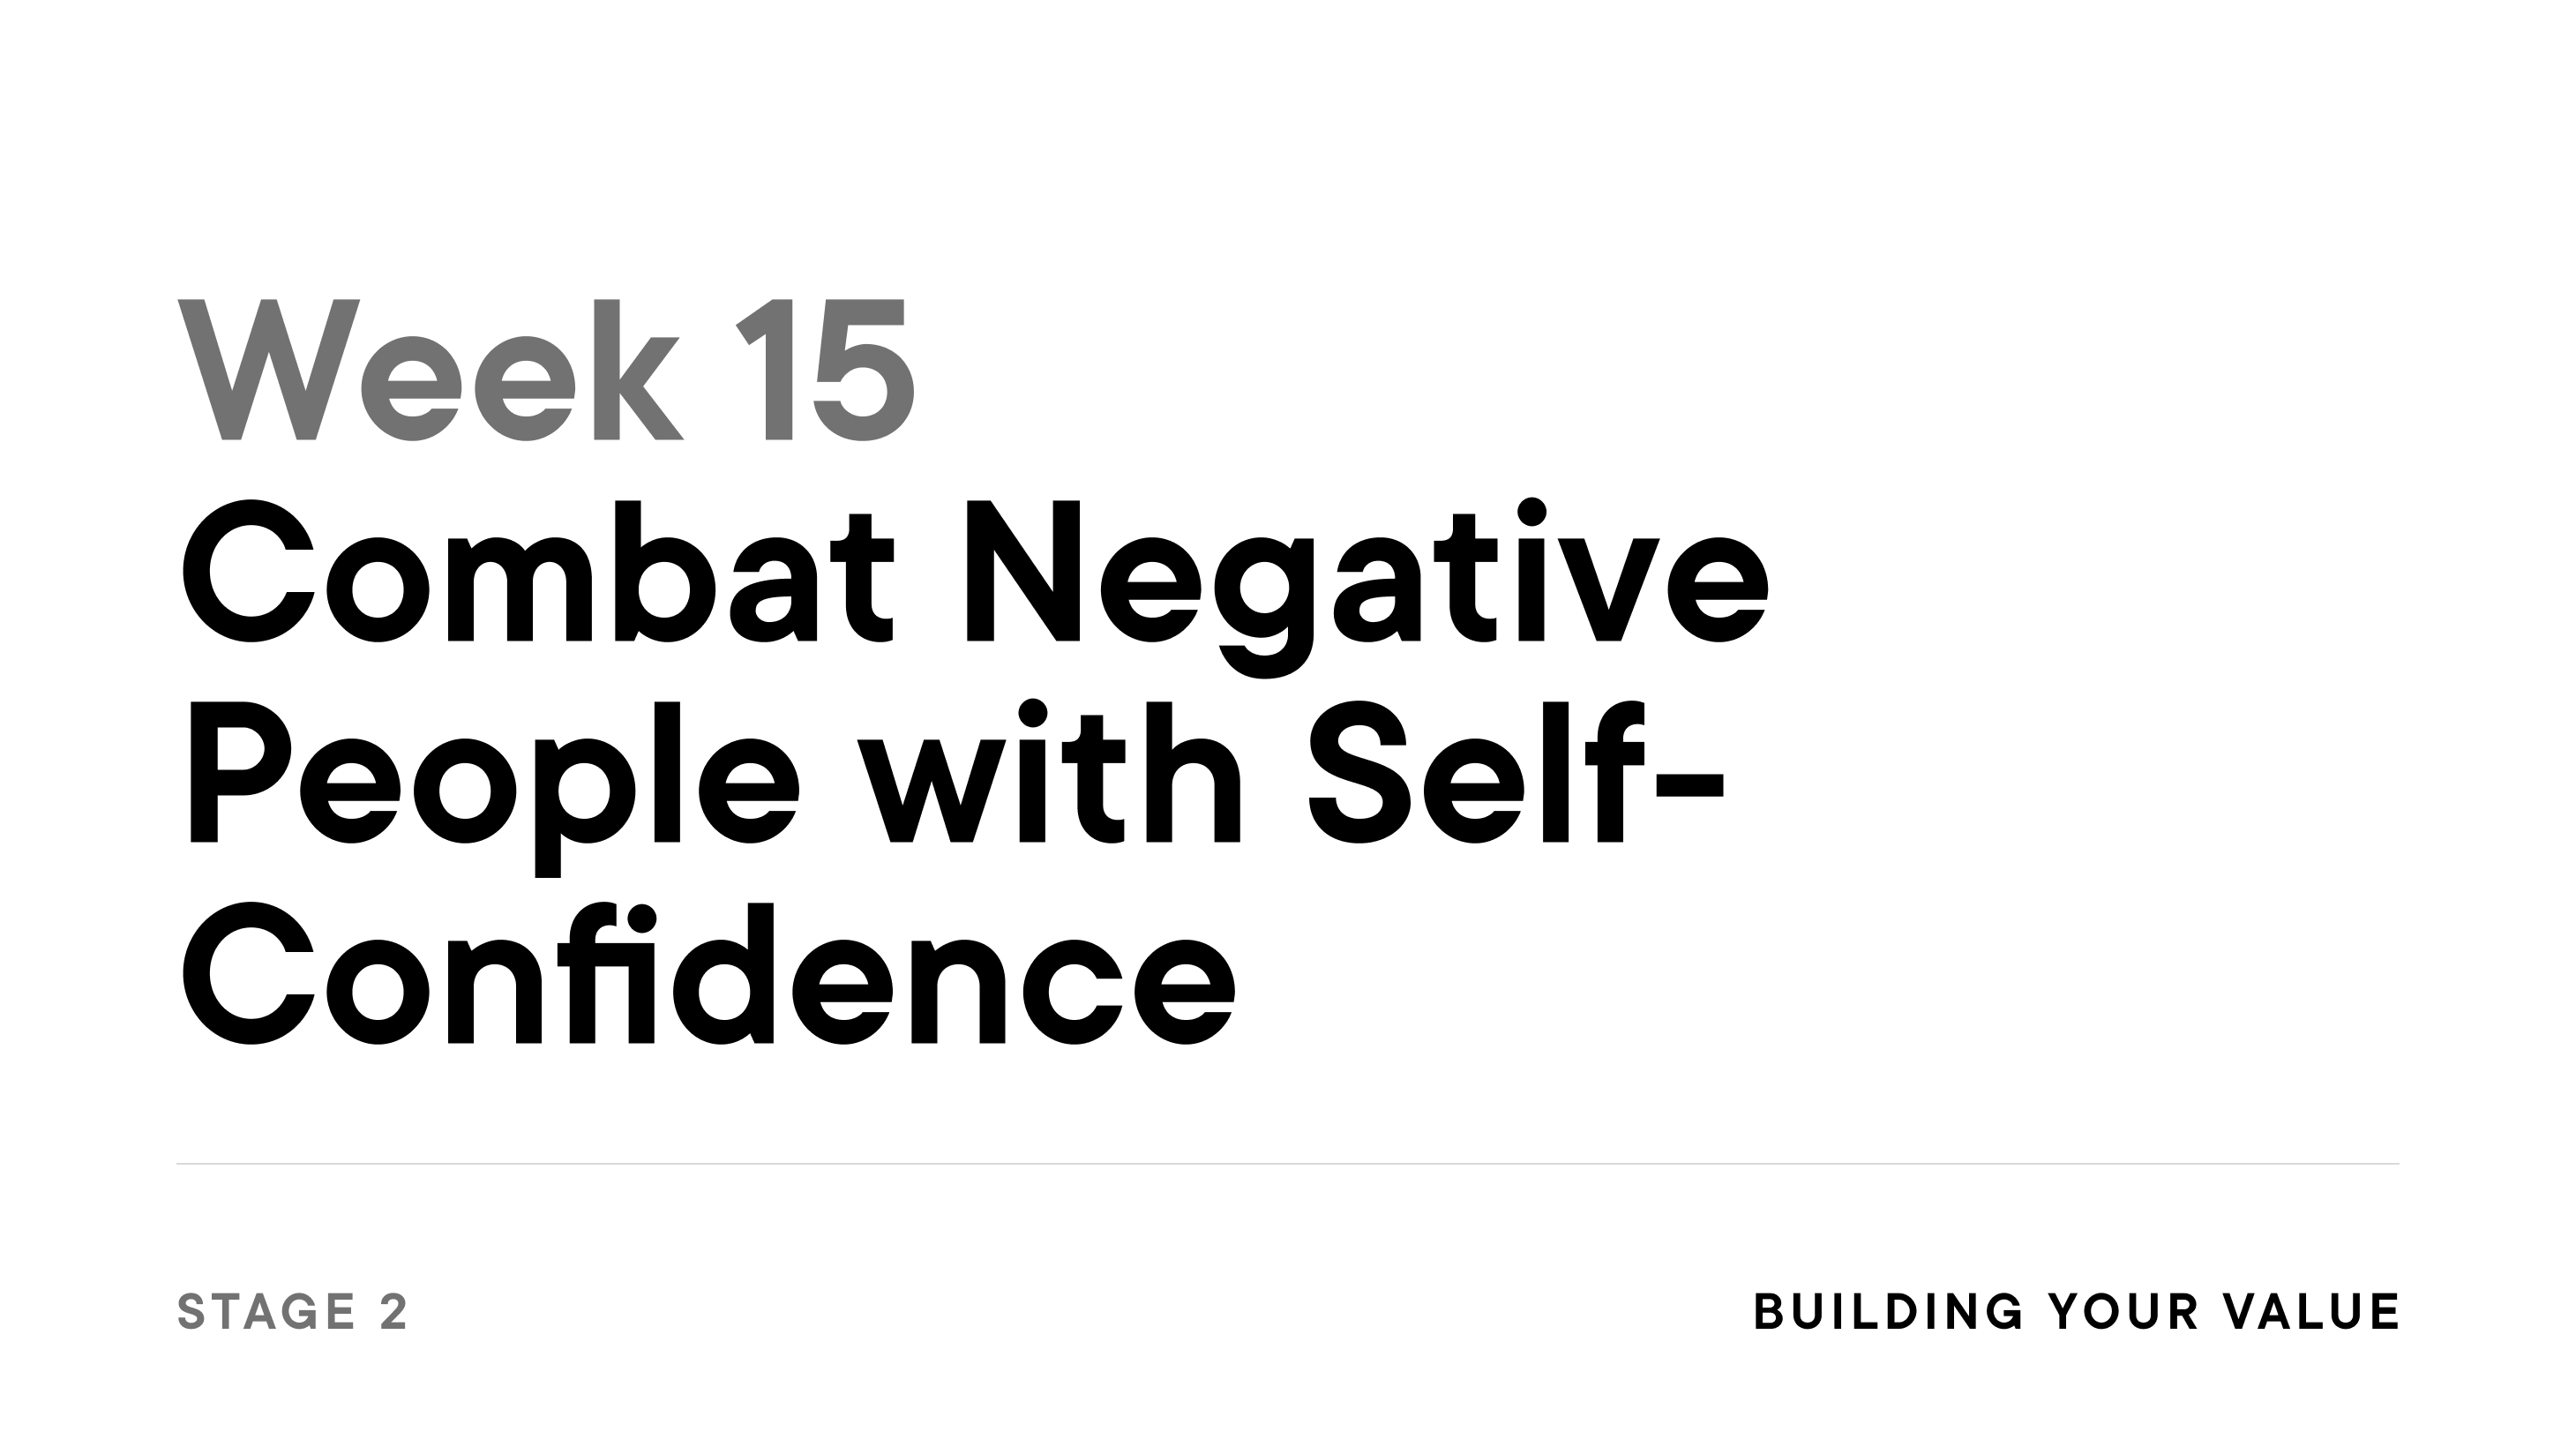 Week 15: Combat Negative People with Self-Confidence